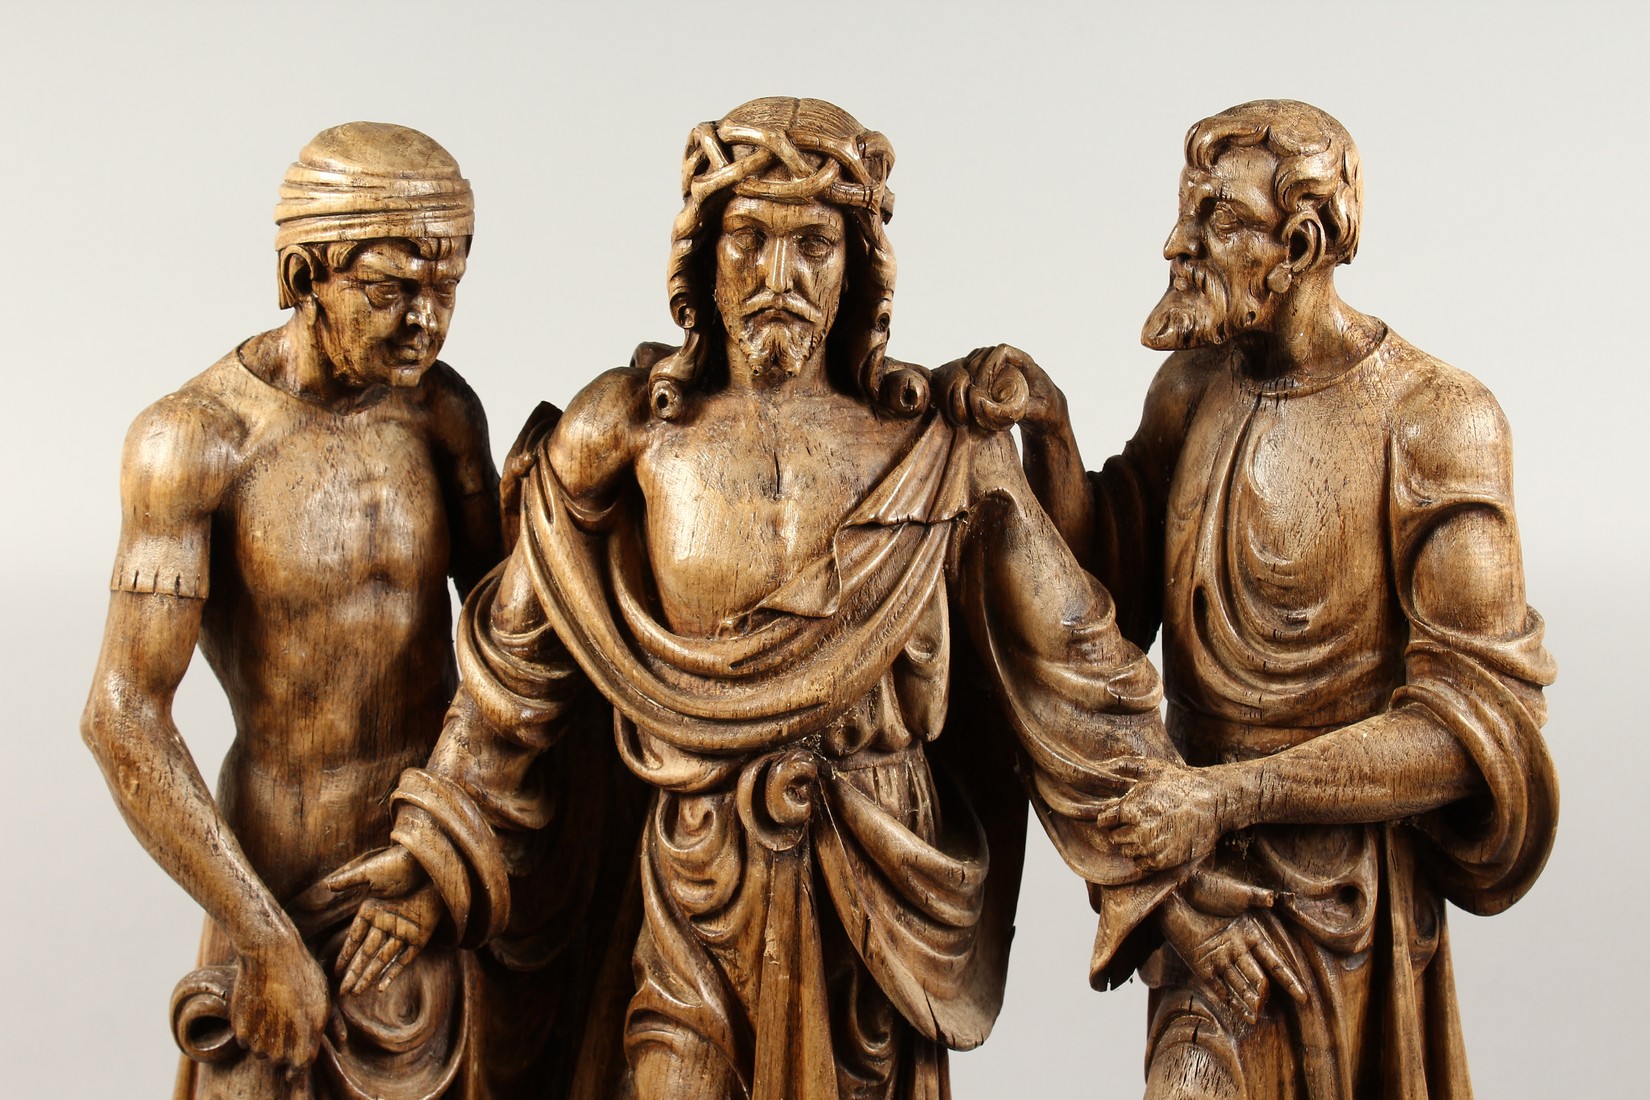 A SUPERB 18TH CENTURY GERMAN, CARVED LIMEWOOD GROUP, CHRIST with two men, the base with a cross - Image 2 of 5